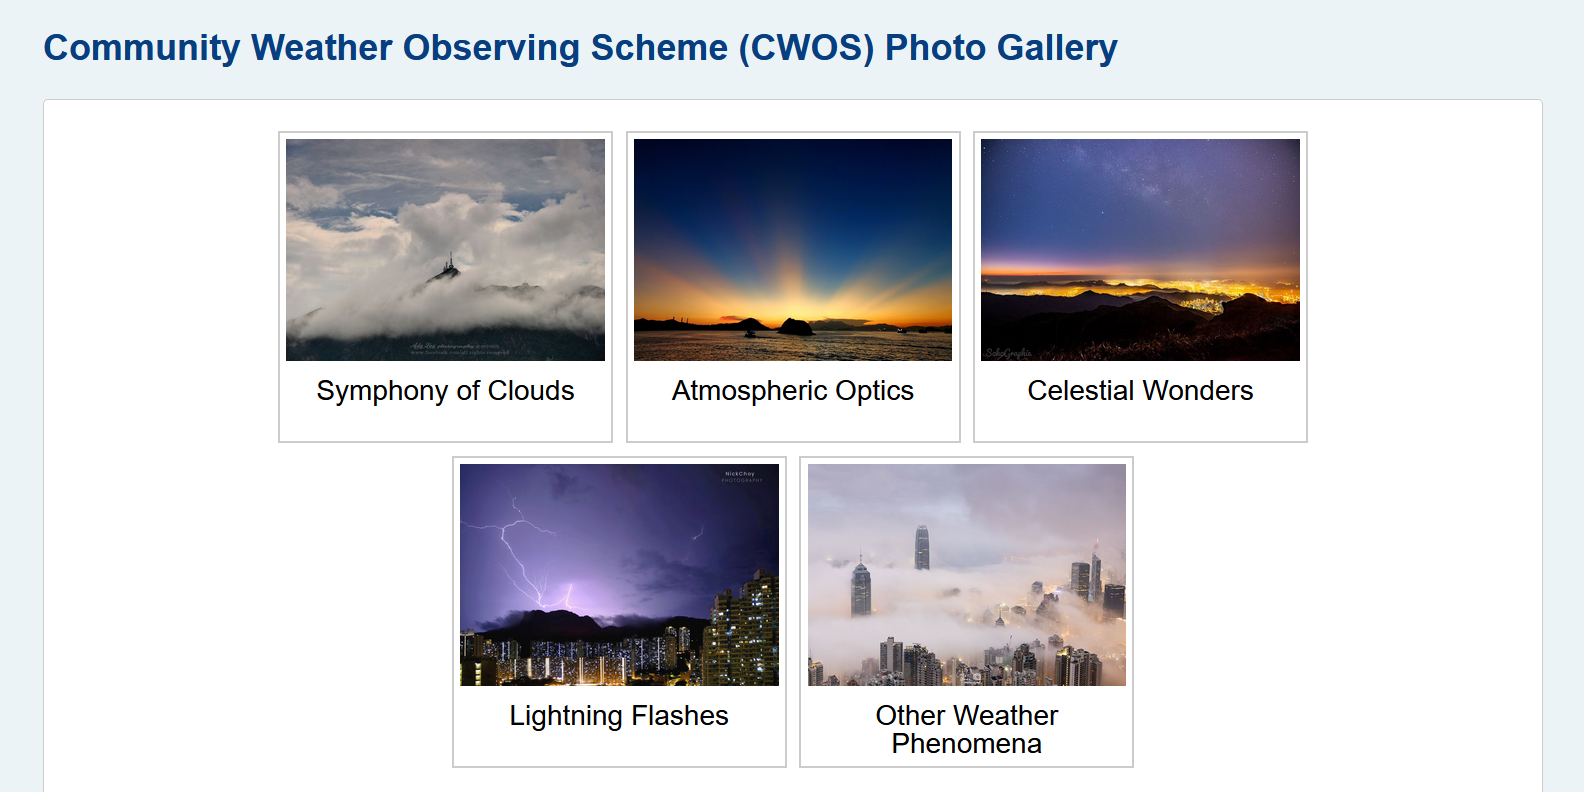 The newly added photos cover five categories in the weather photo gallery: Symphony of Clouds, Atmospheric Optics, Celestial Wonders, Lightning Flashes and Other Weather Phenomena